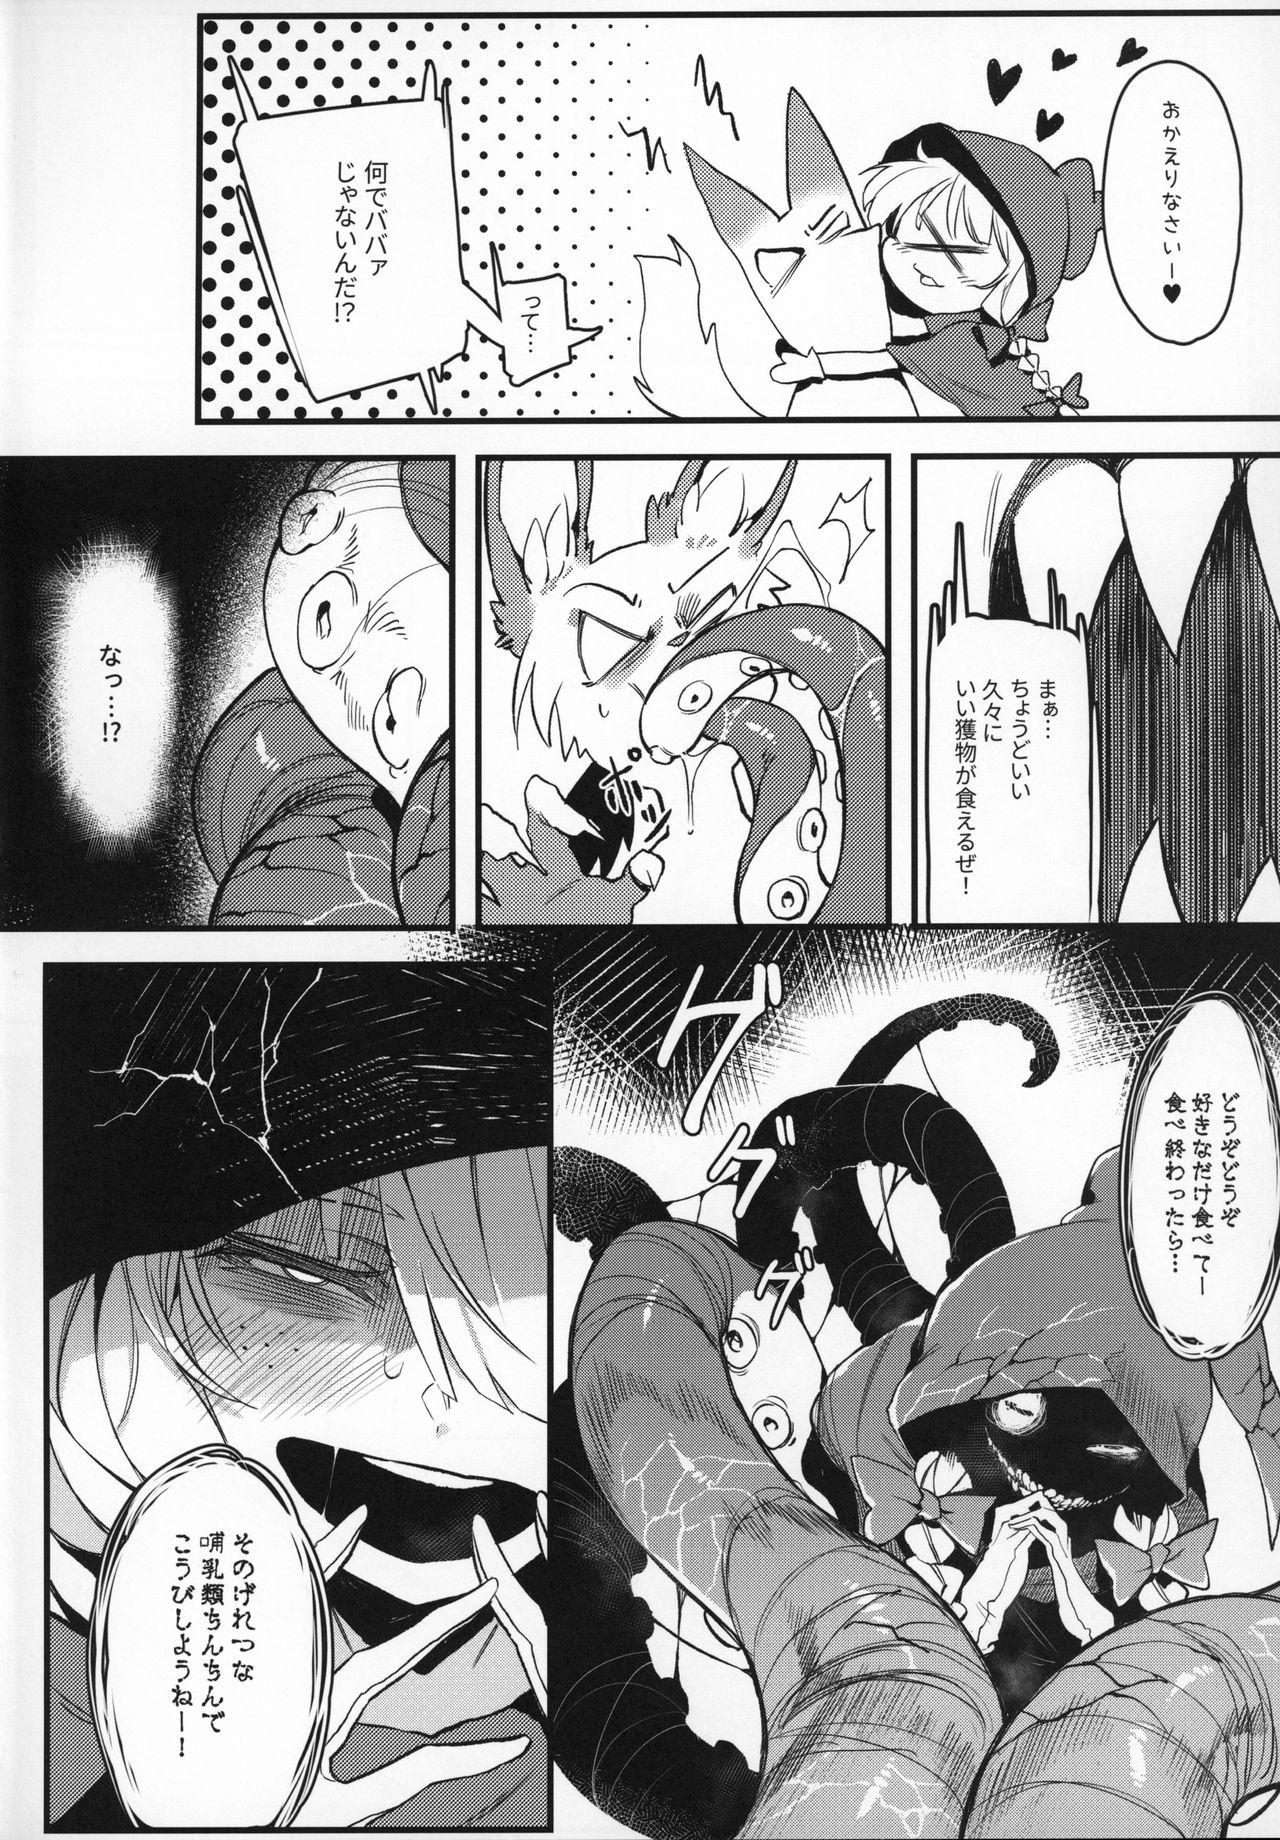 Joven Hoshoku Shoujo II - Little red riding hood Private Sex - Page 3